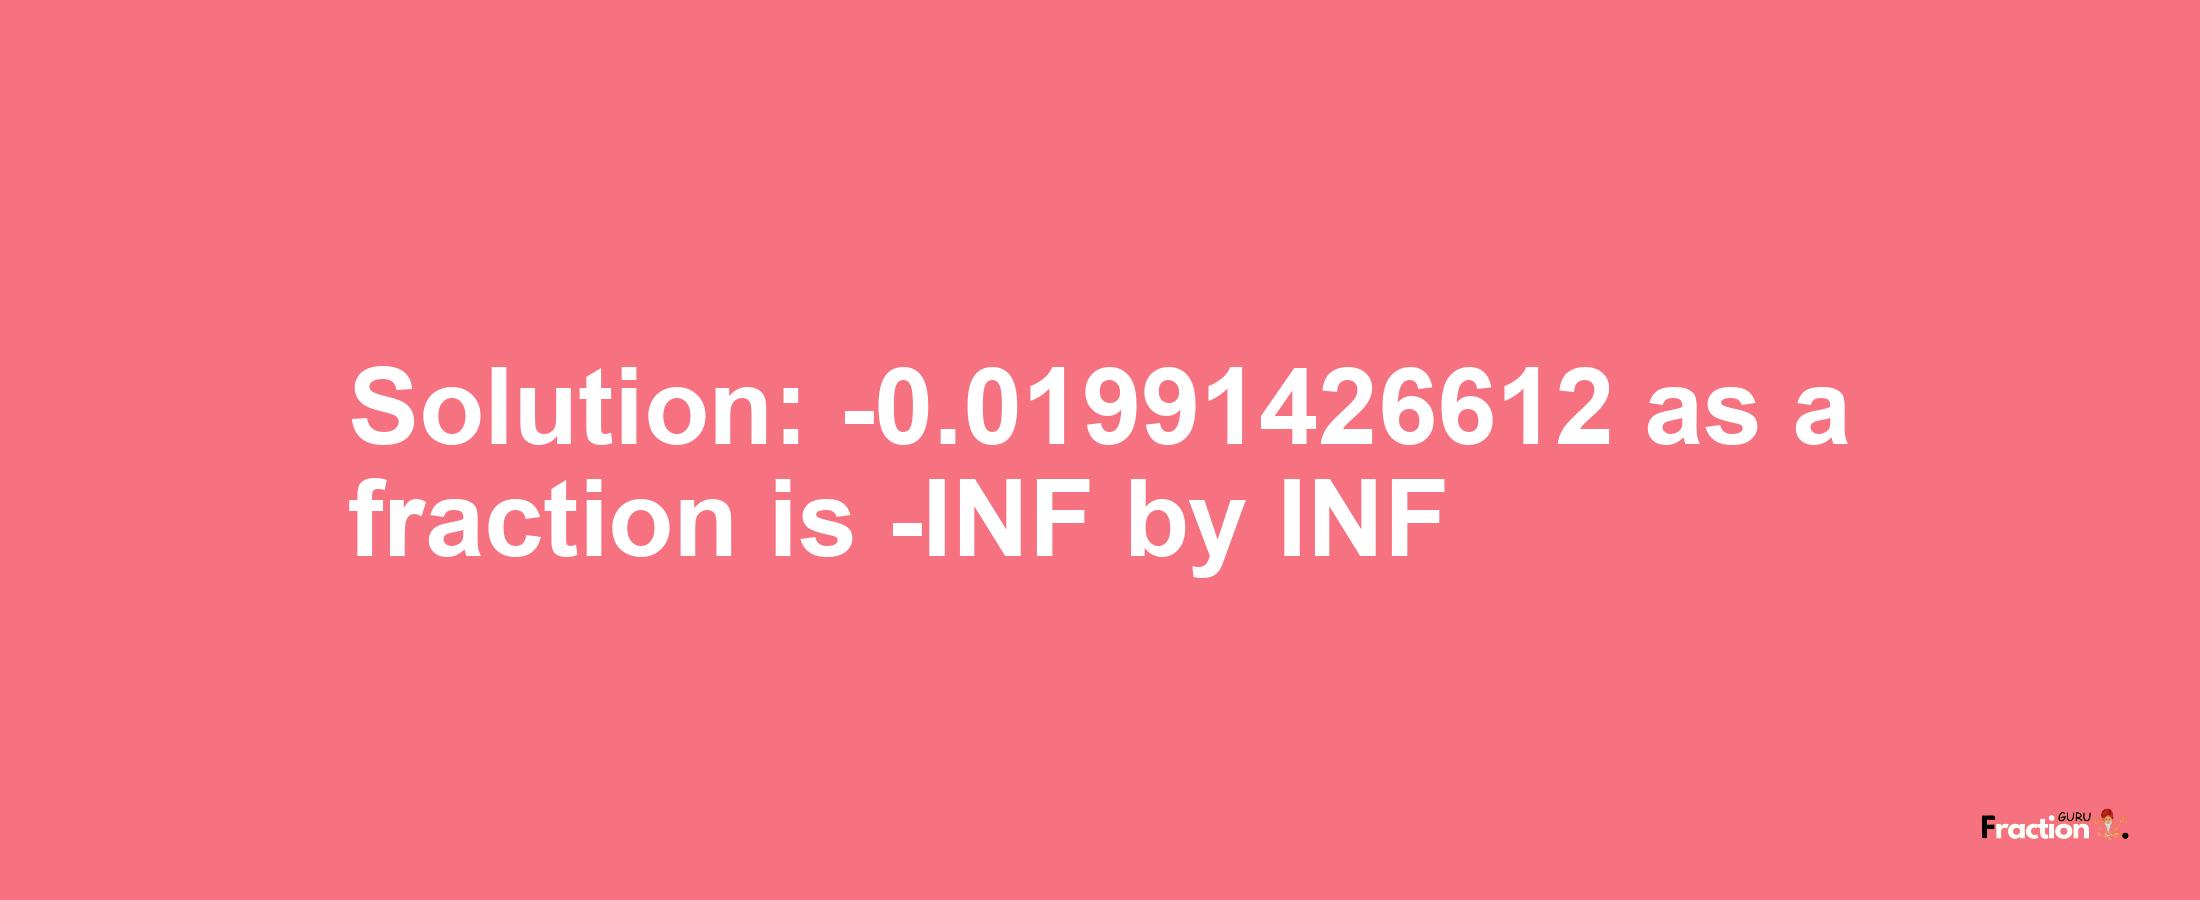 Solution:-0.01991426612 as a fraction is -INF/INF